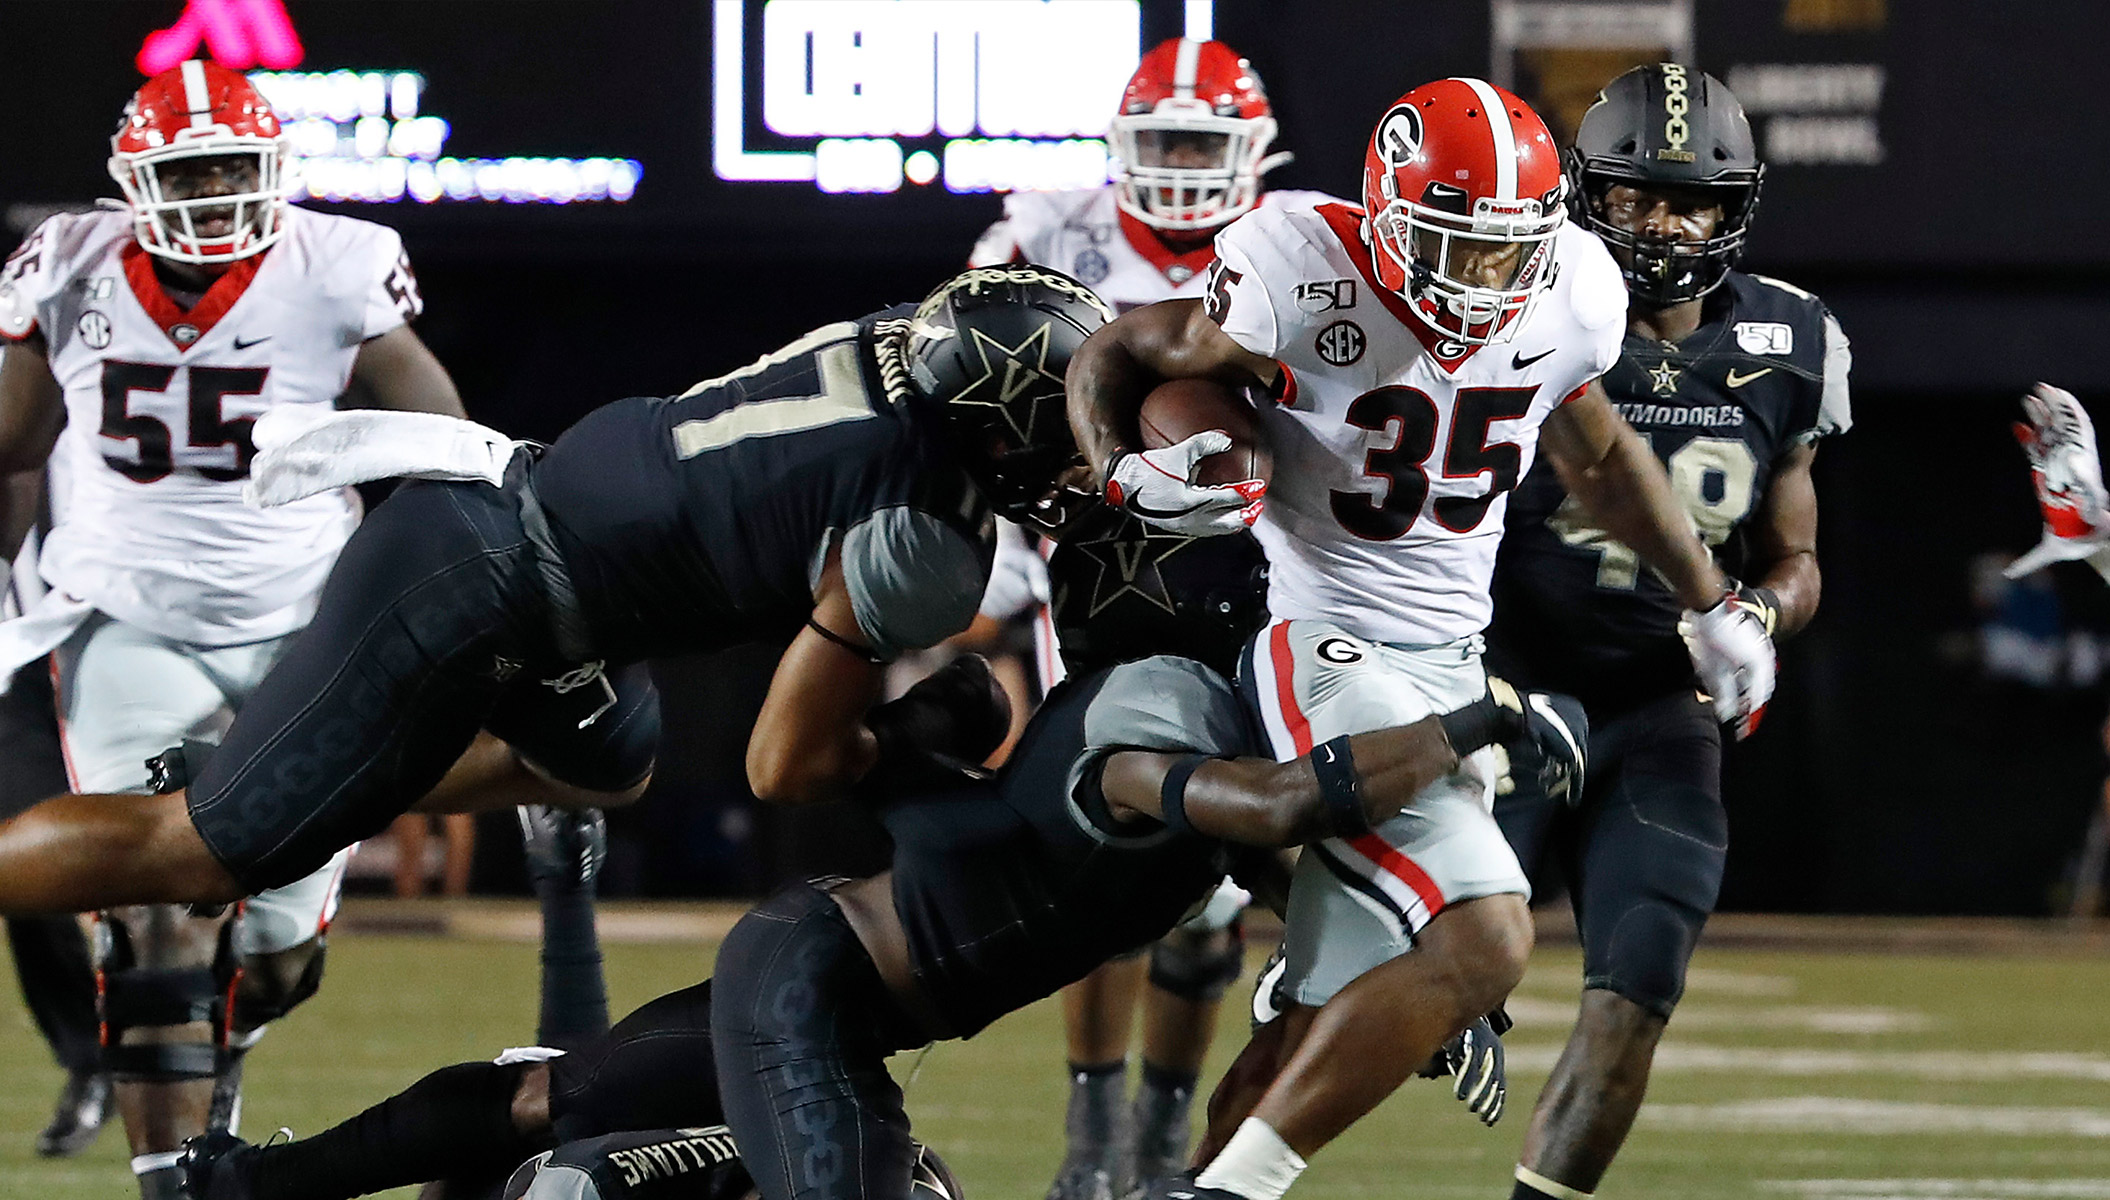 UGA answers some, not all, questions in win over Vanderbilt